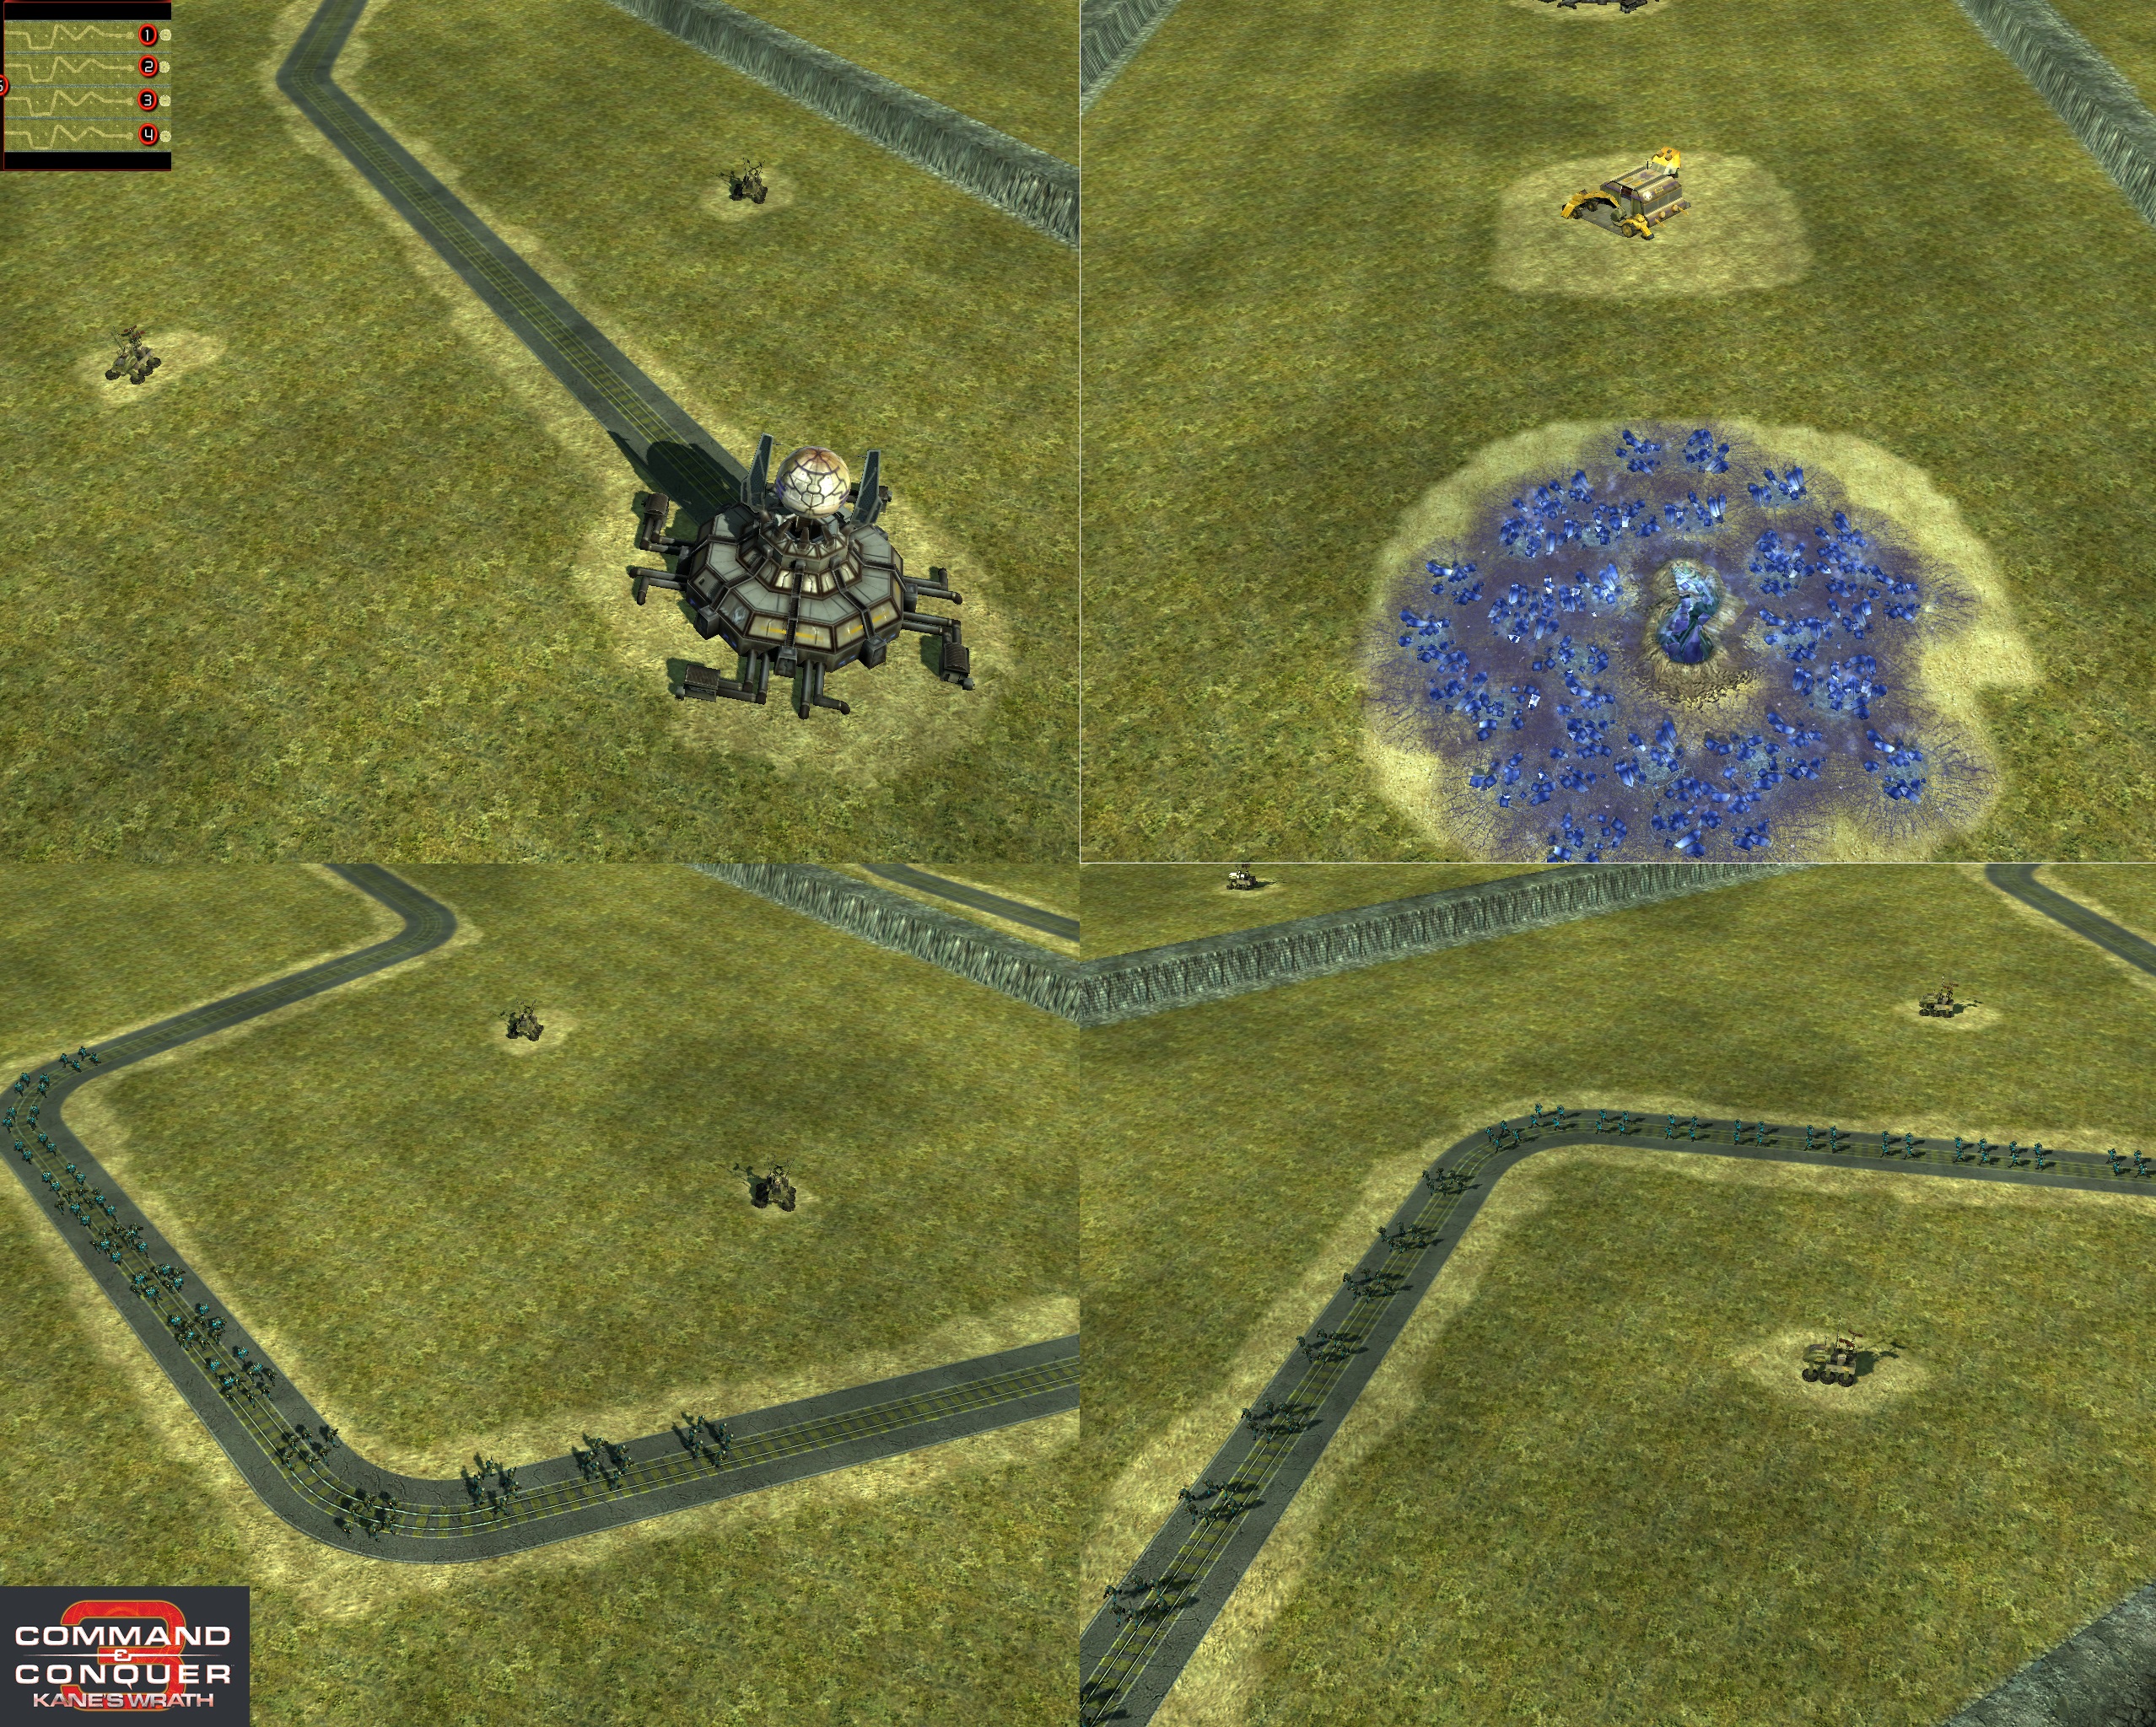 download maps for command and conquer 3 kanes wrath